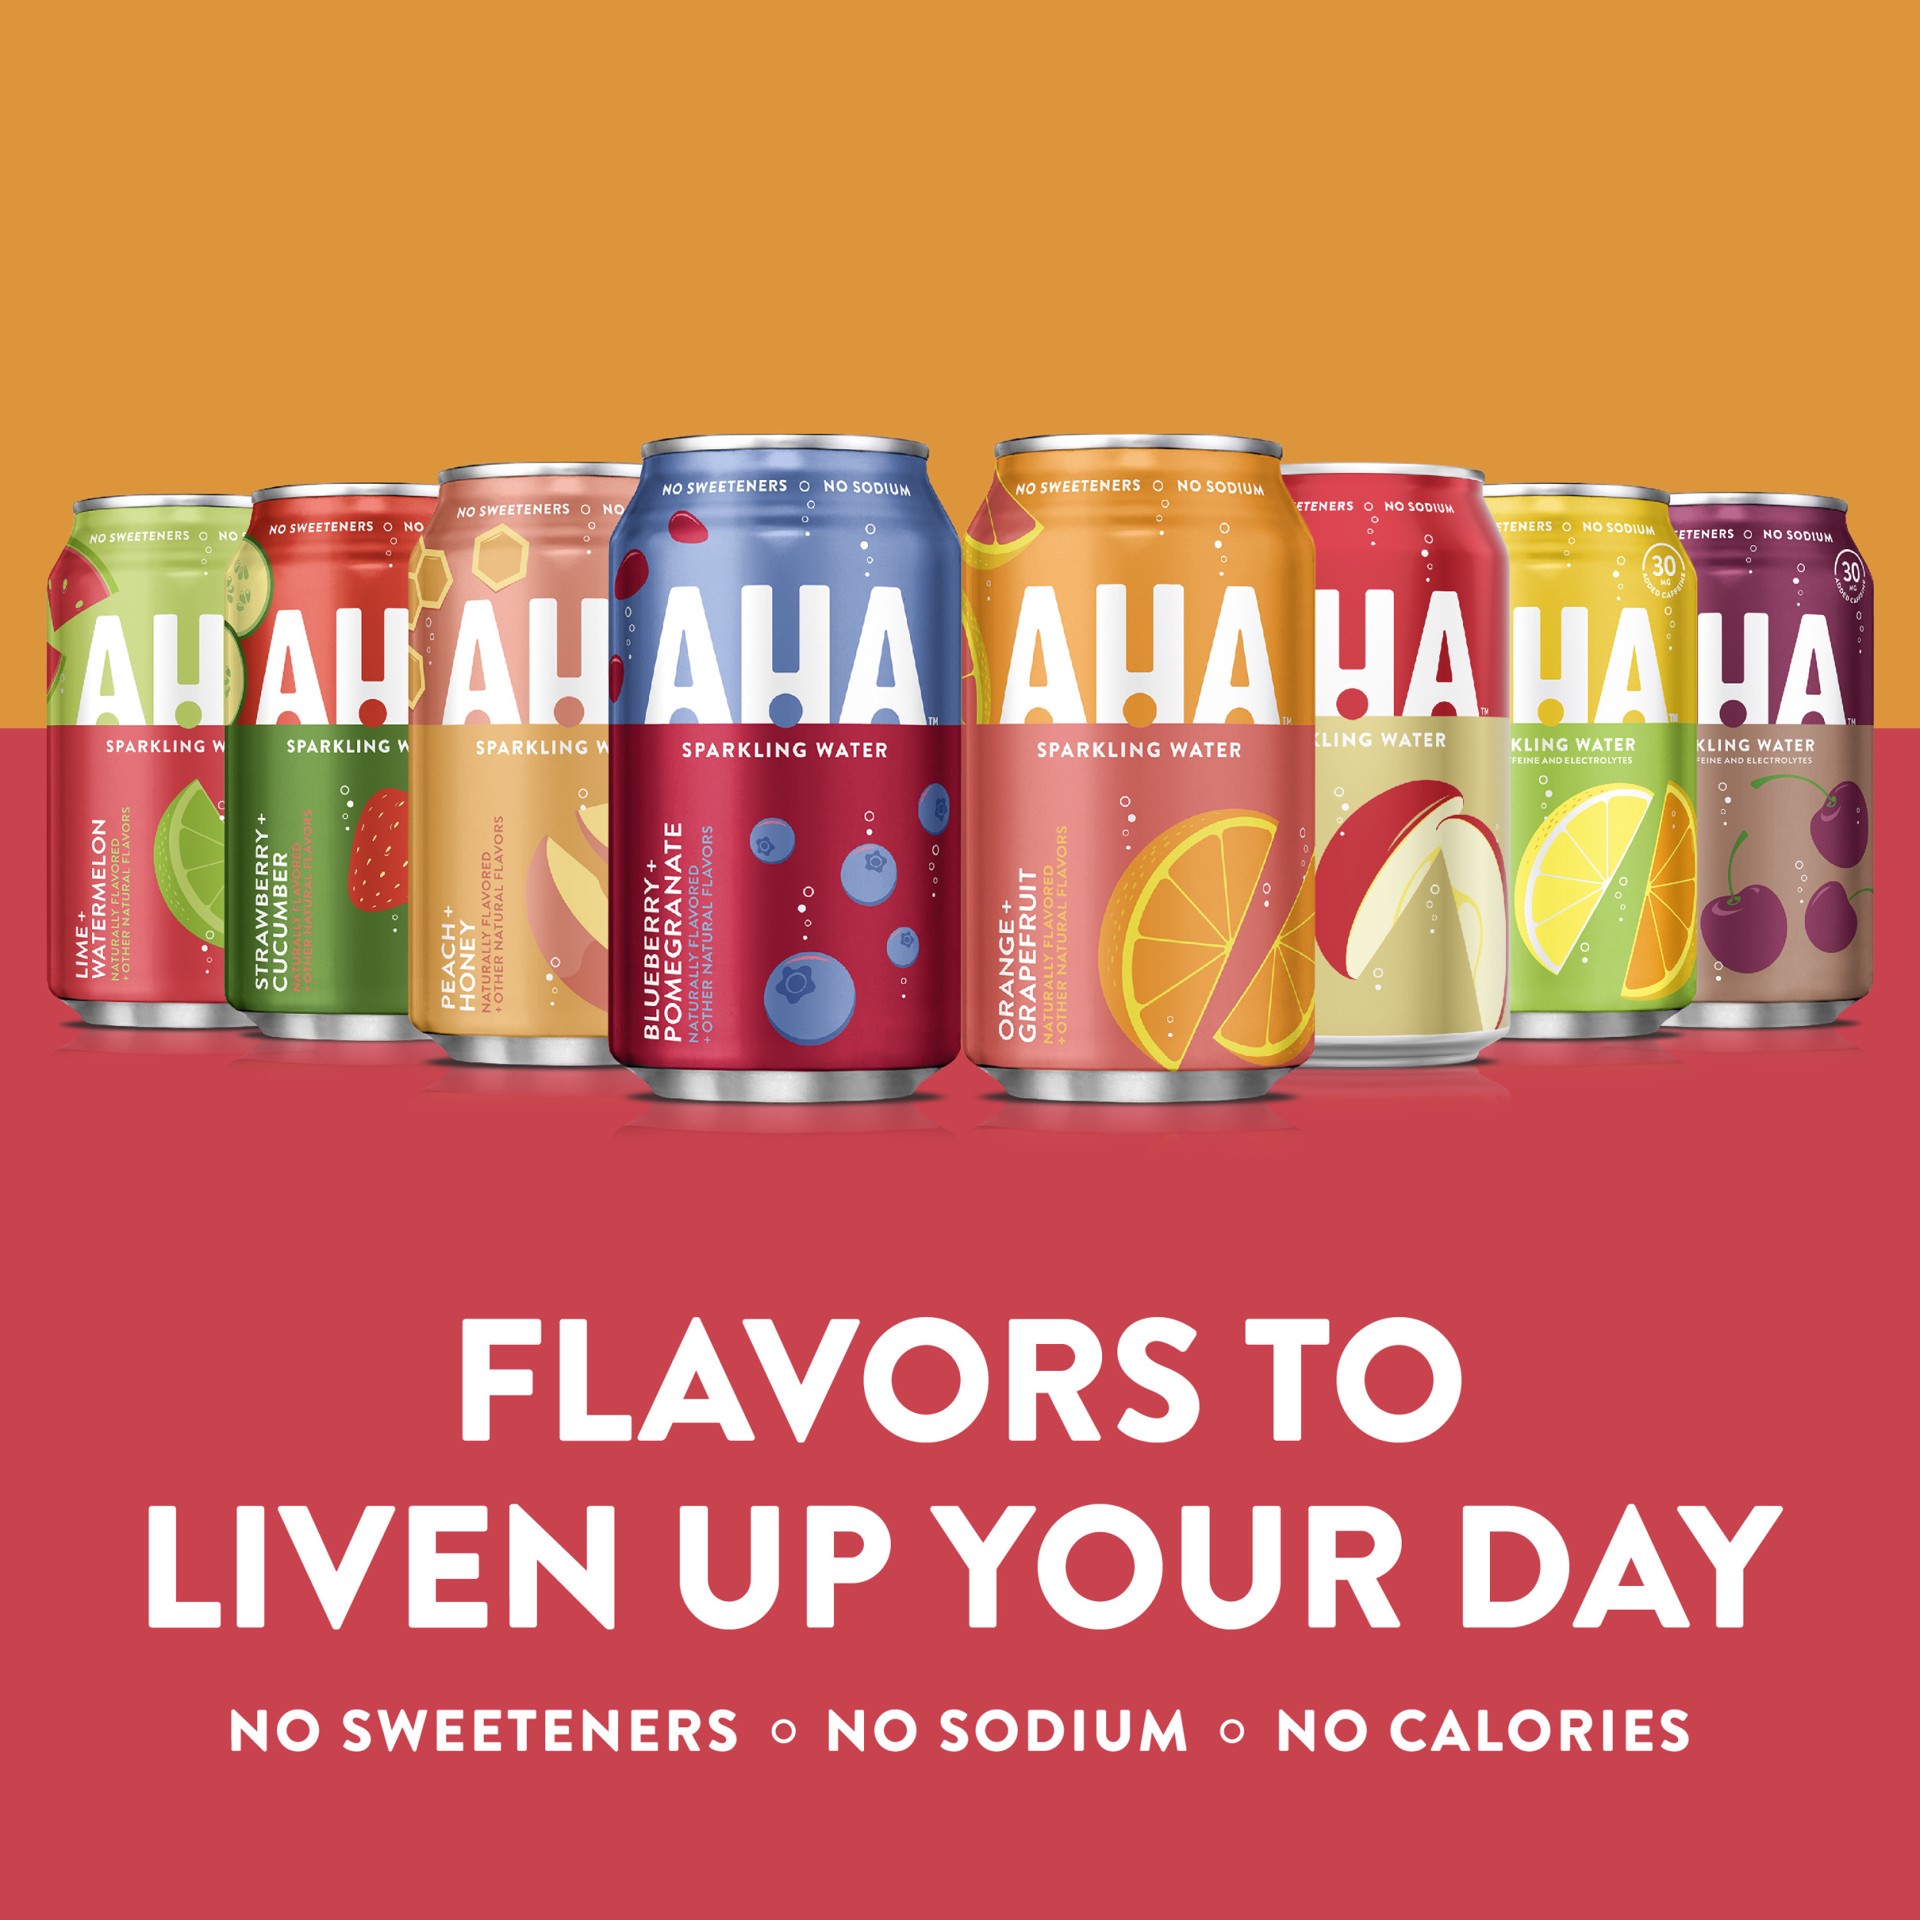 slide 10 of 10, AHA Sparkling Water, Black Cherry + Coffee Flavored Water, with Caffeine & Electrolytes, Zero Calories, Sodium Free, No Sweeteners, 12 fl oz, 8 Pack, 8 ct; 12 fl oz